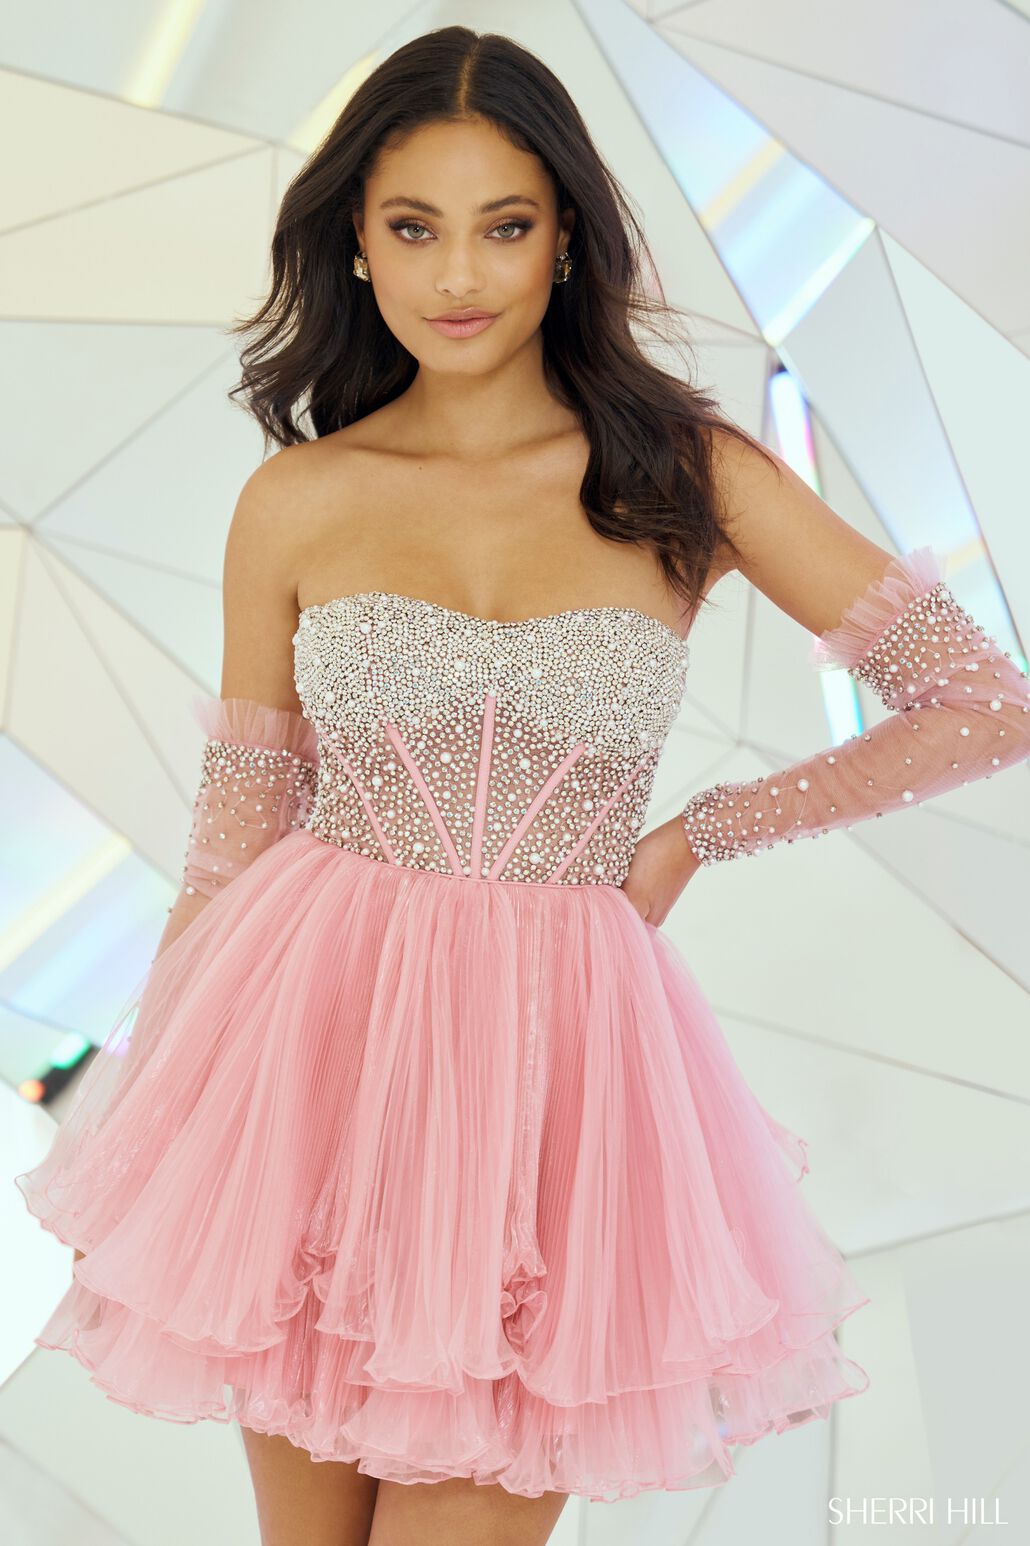 SHERRI HILL 55748 Chic Strapless Cocktail Dress with Pearl Embellishments - A stylish strapless cocktail dress featuring a sheer corset with delicate pearl embellishments, pleated organza ruffle skirt, and removable pearl sleeves for a versatile and trendy look.